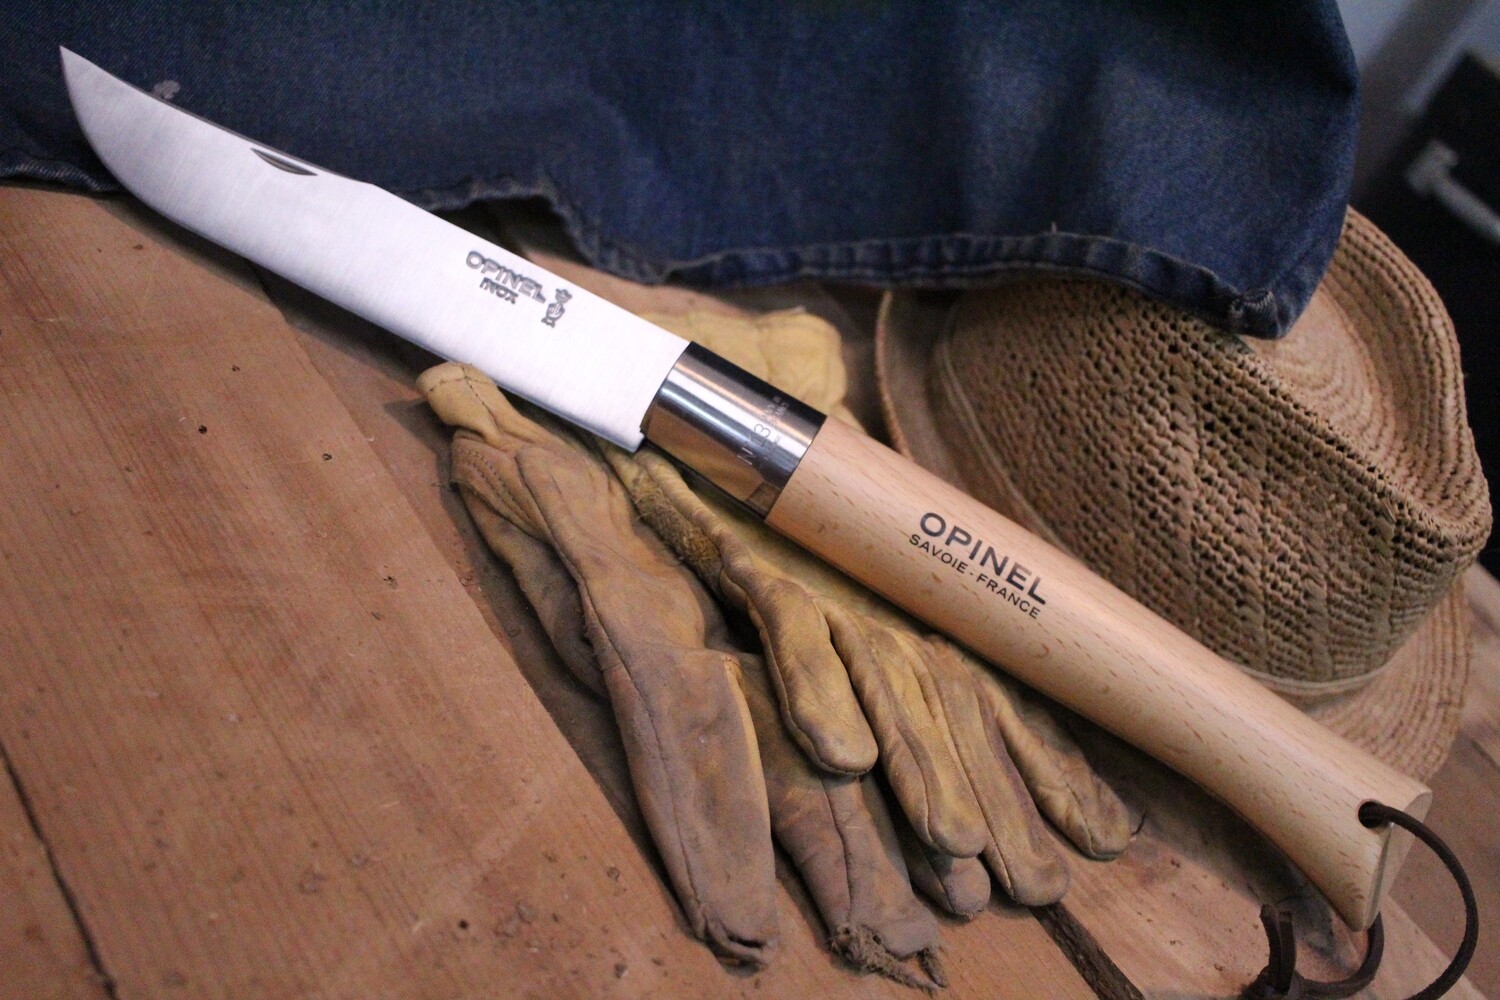 OPINEL Stainless No13 'Giant